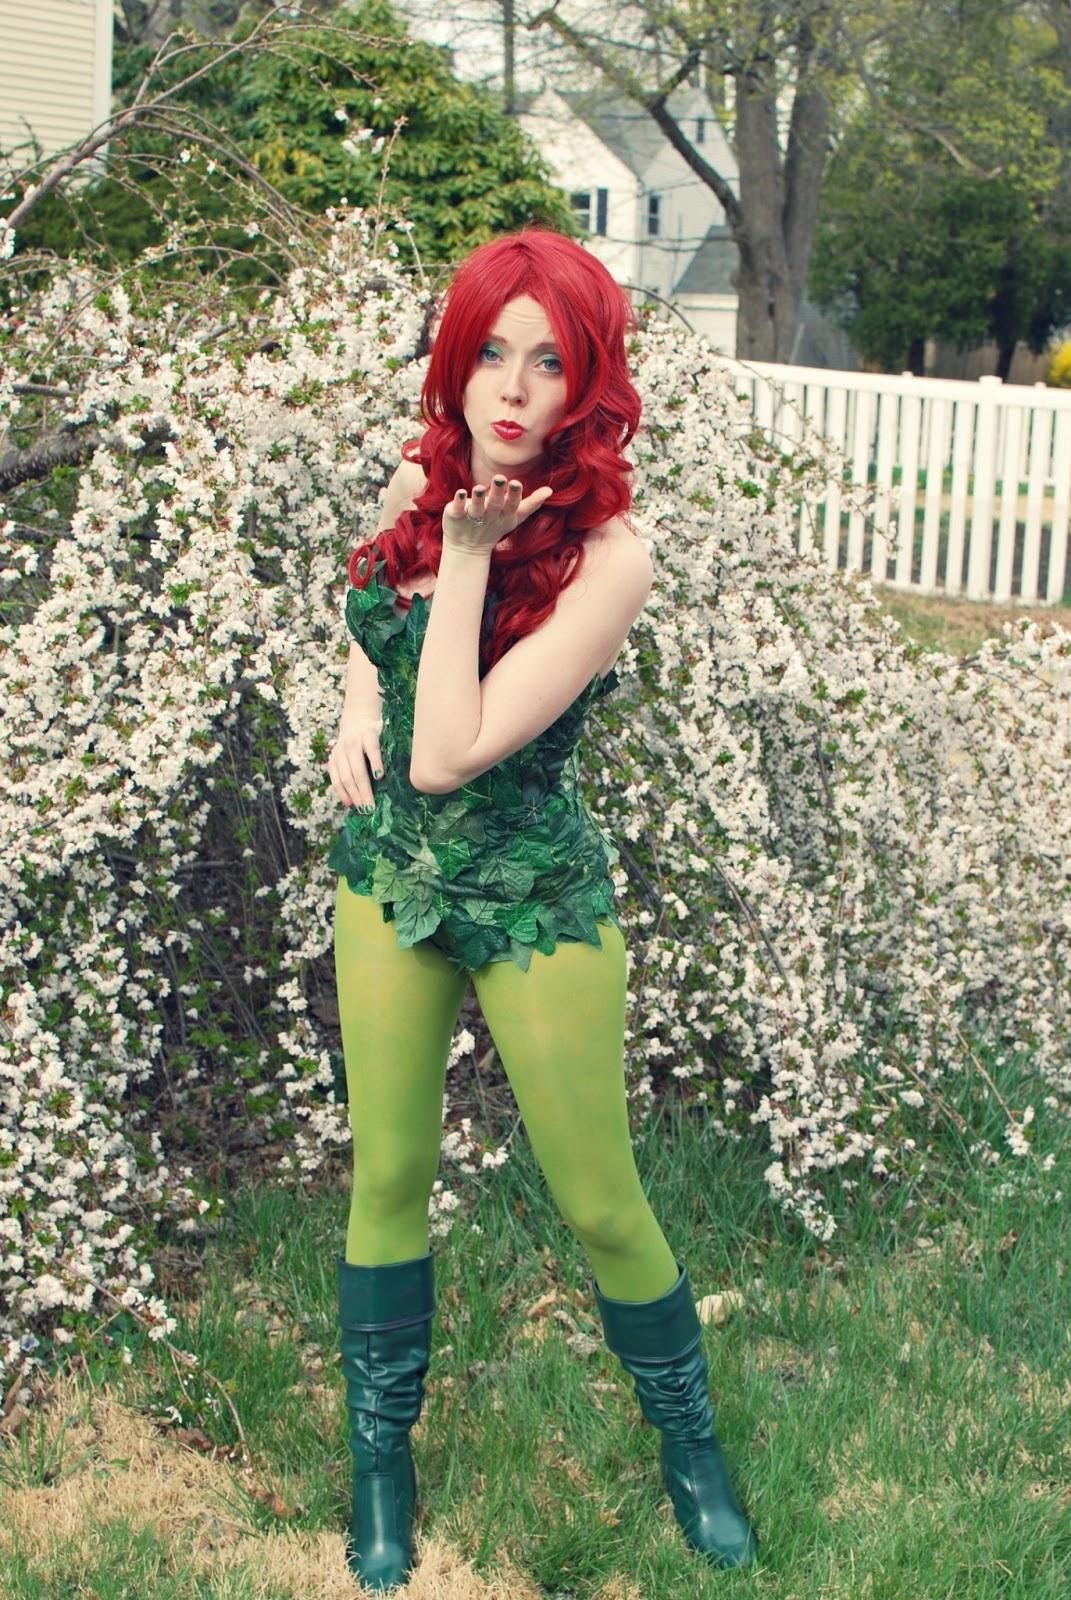 50+ Hot Pictures Of Poison Ivy – One Of The Most Beautiful Batman’s Villain 6